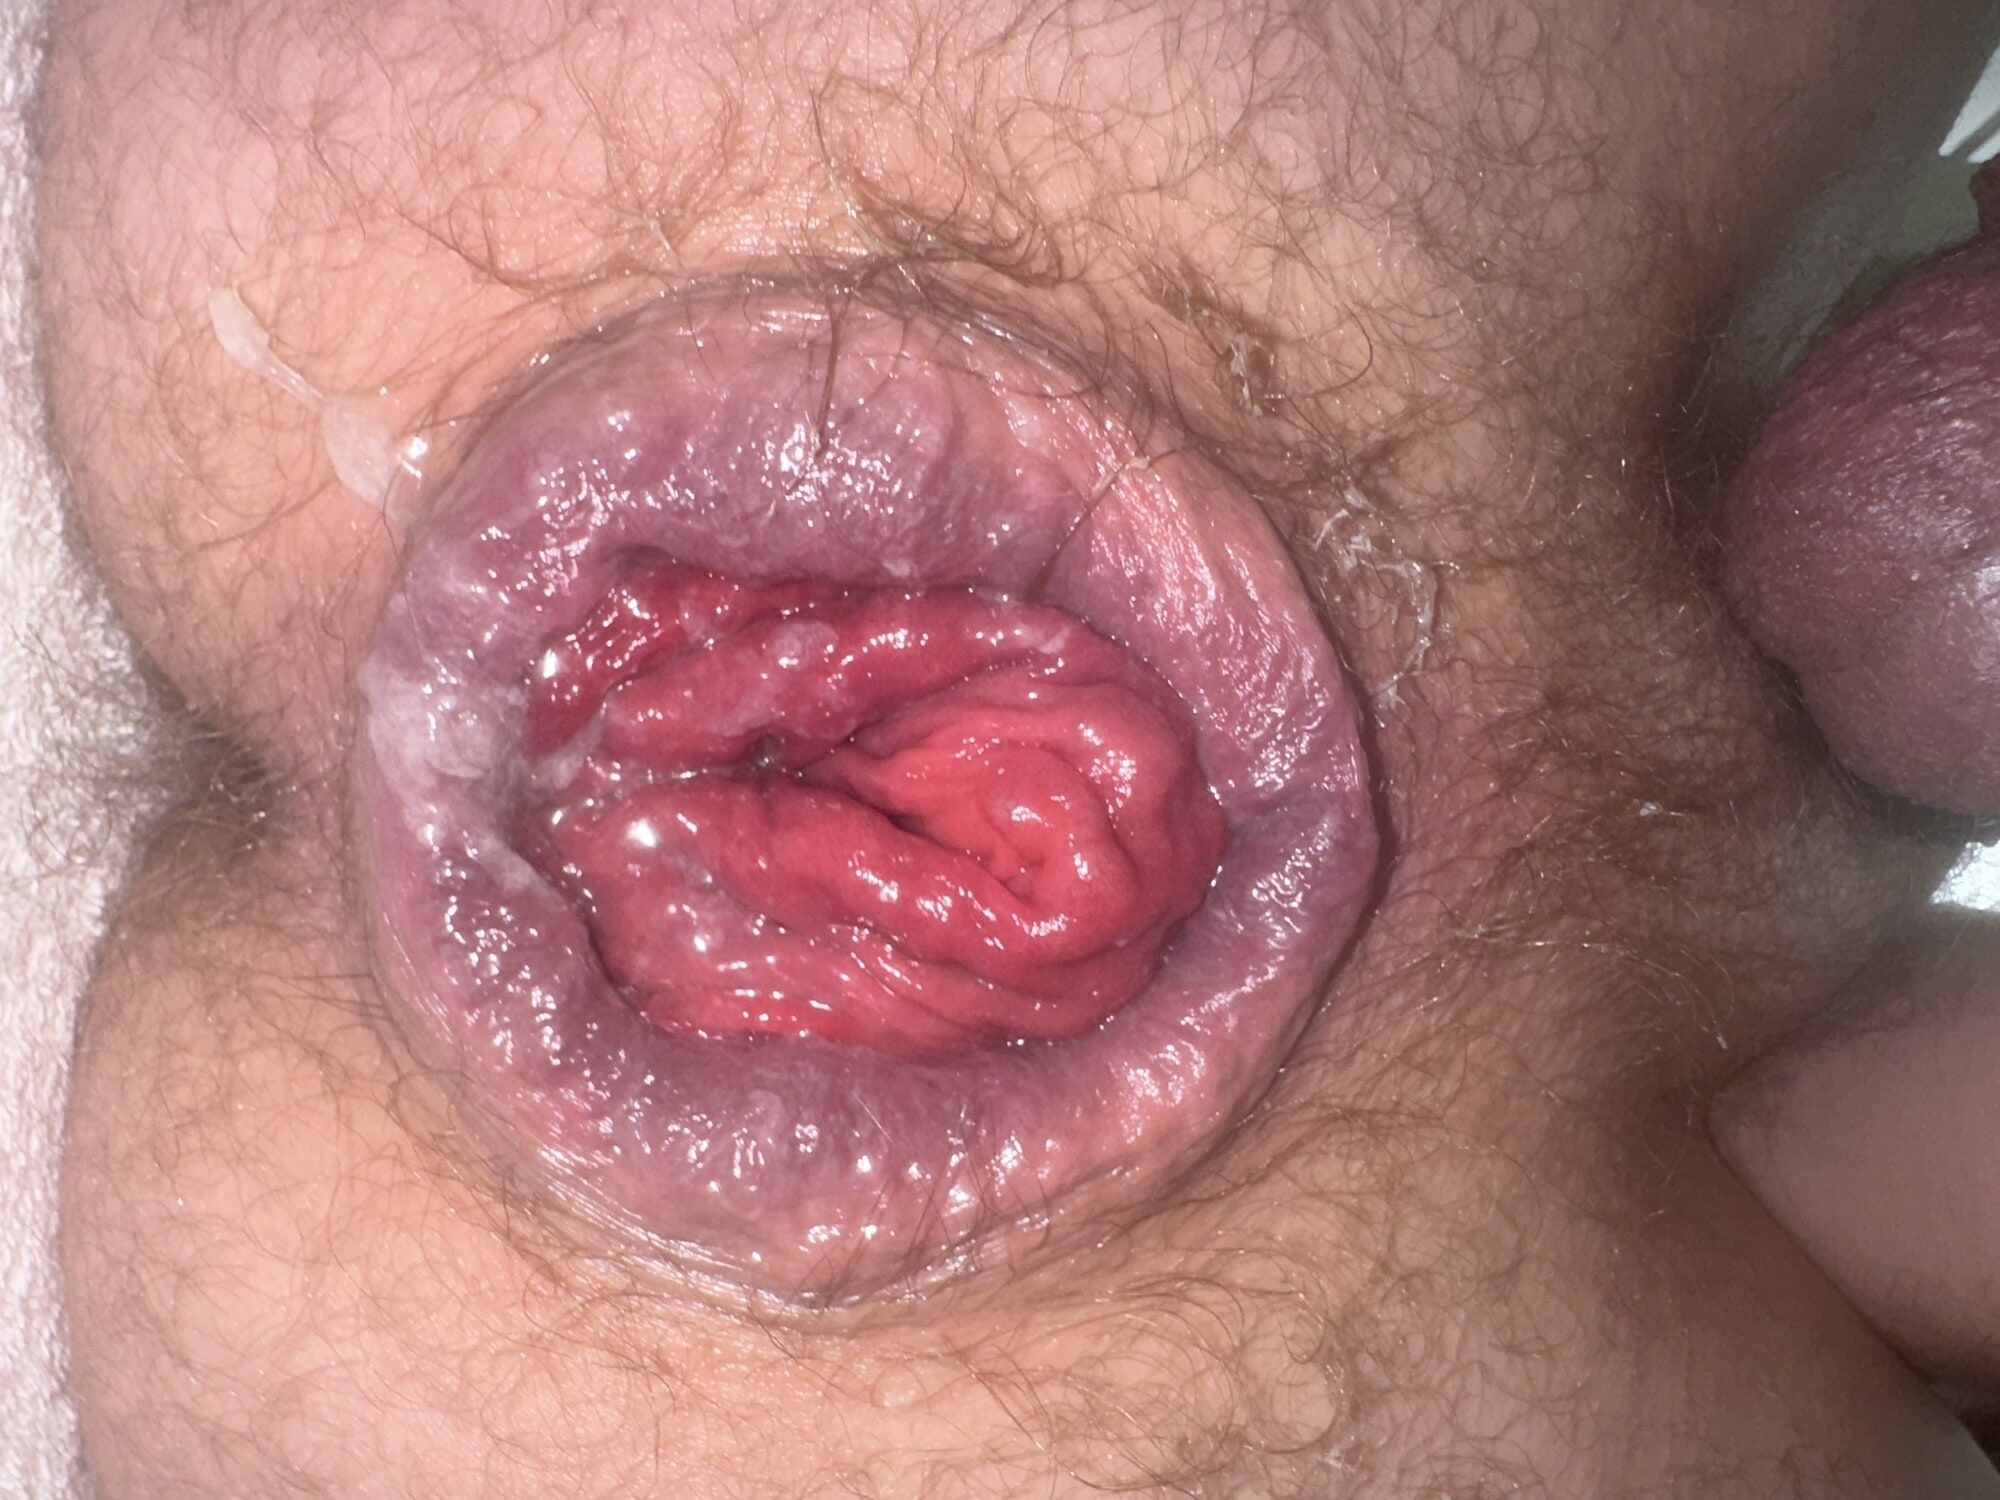 Anal prolapse in oxball ff pighole #17